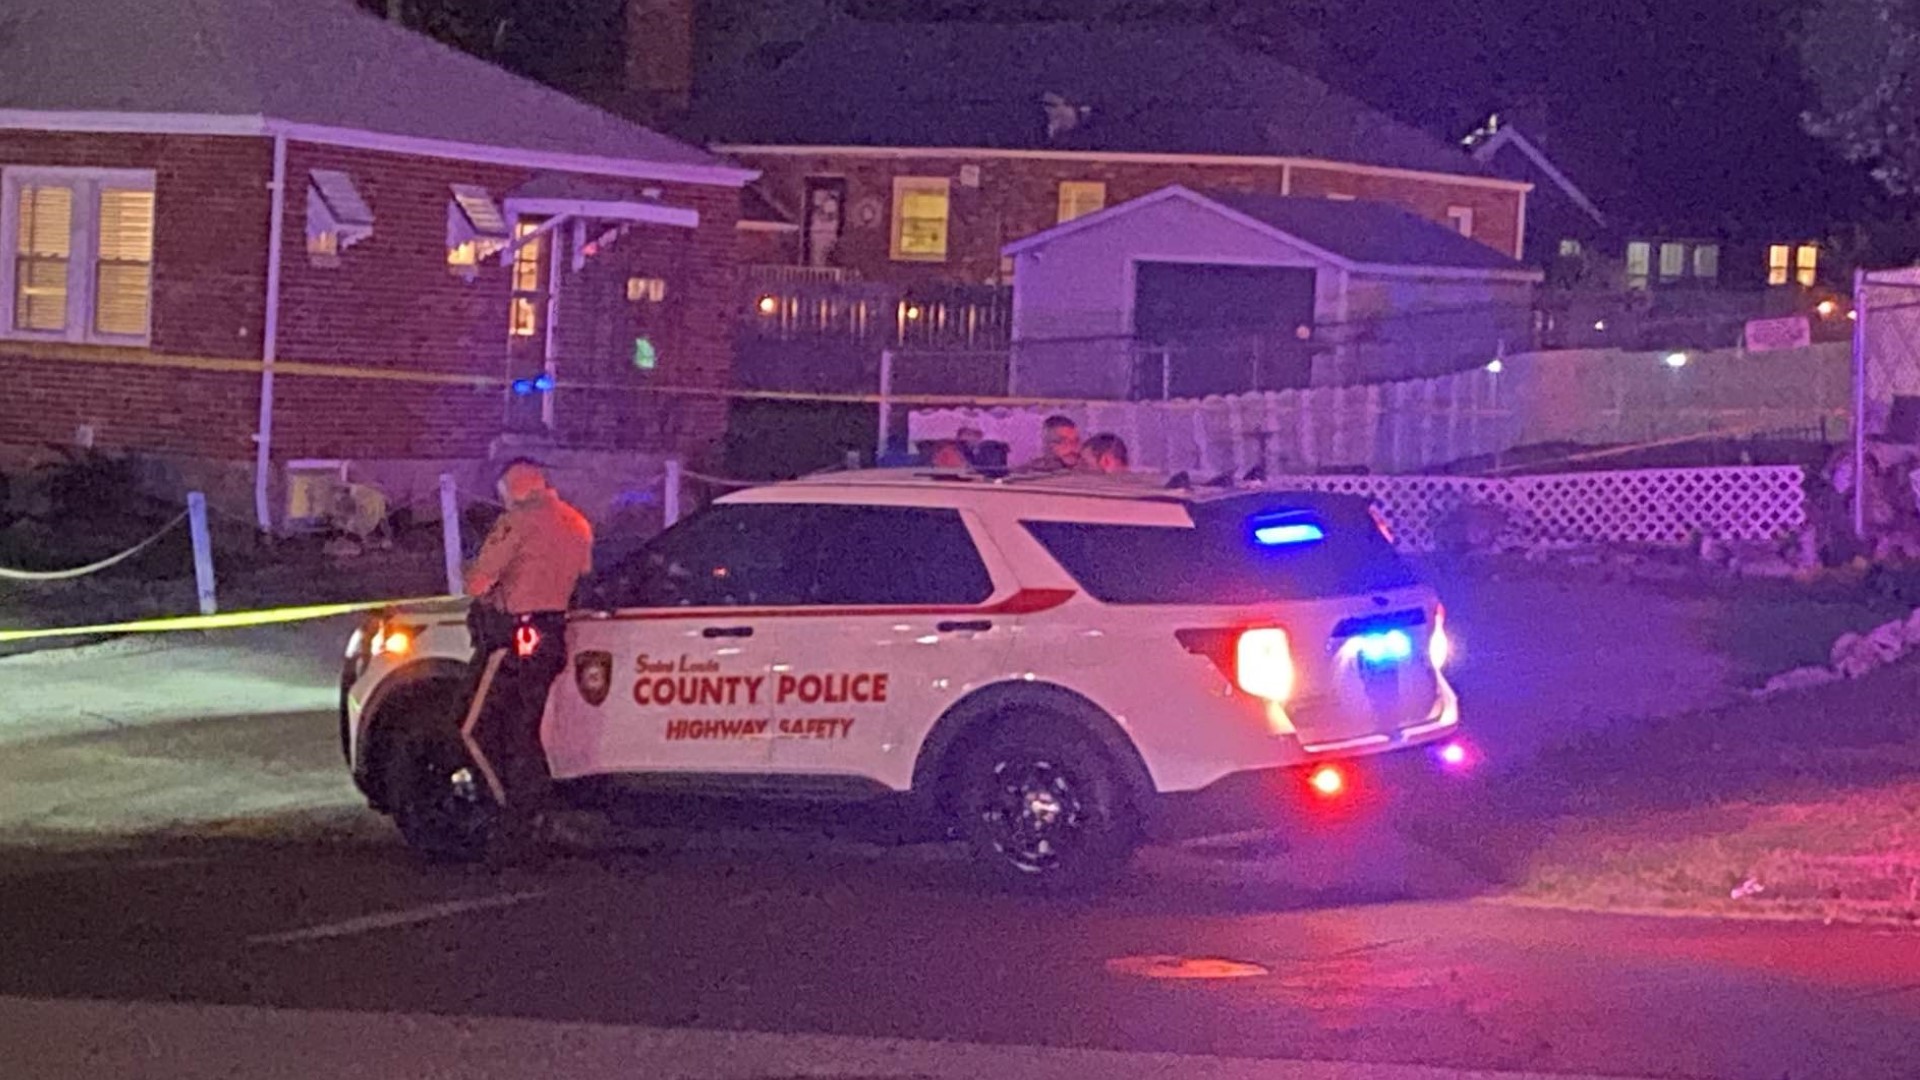 A man was taken to a hospital with life-threatening injuries after he was shot by police Wednesday night in south St. Louis County.